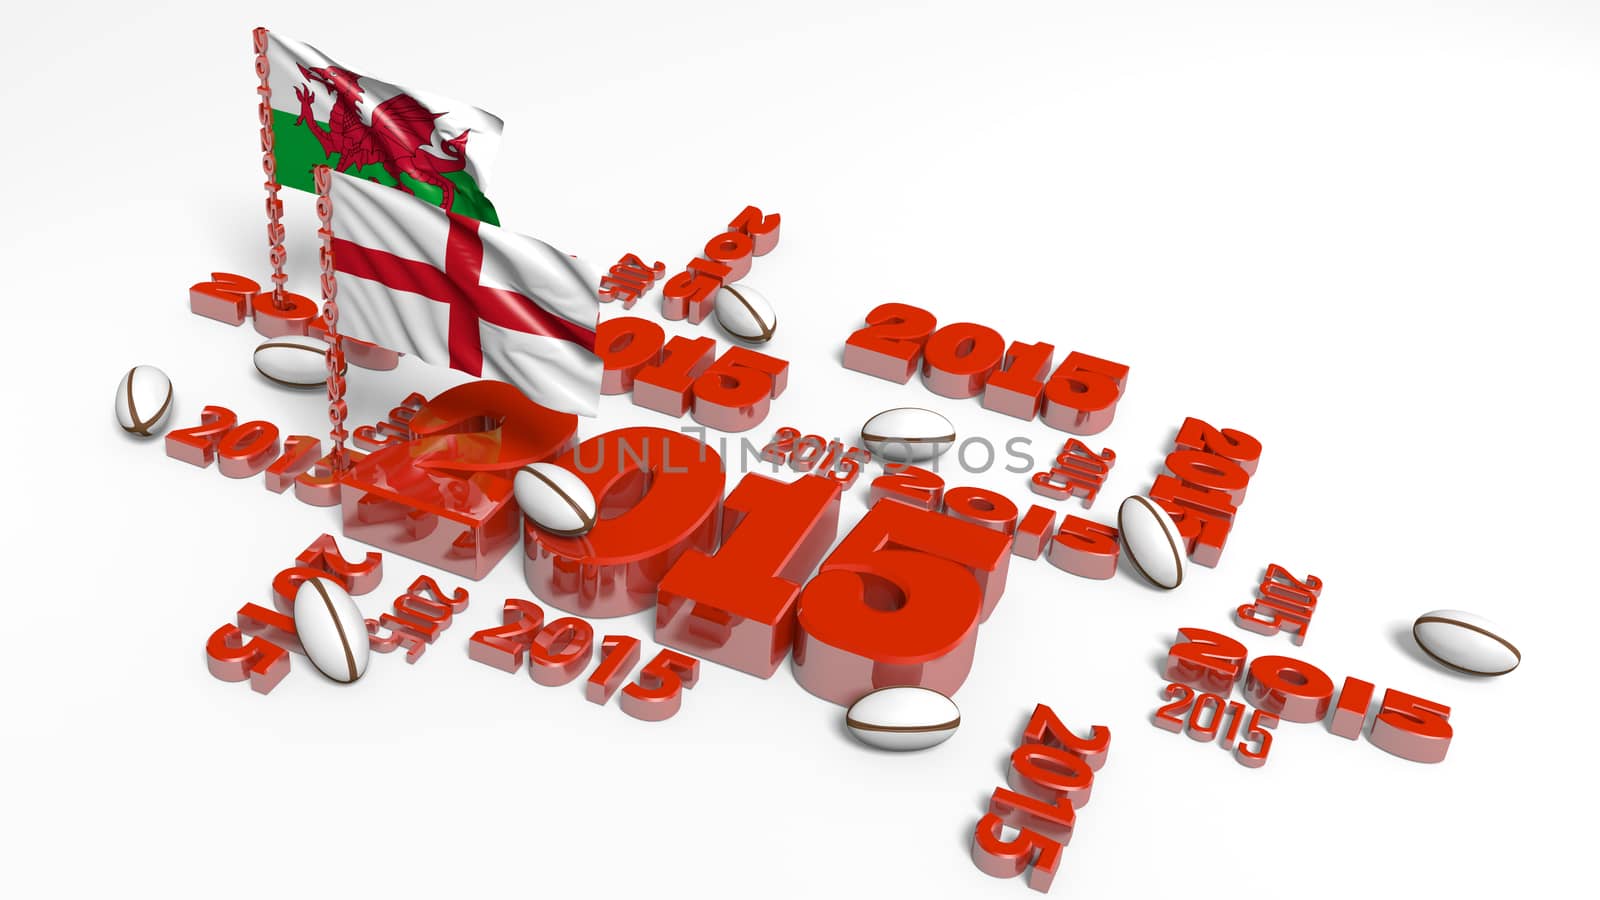 2015 England and Wales Flags with balls by shkyo30